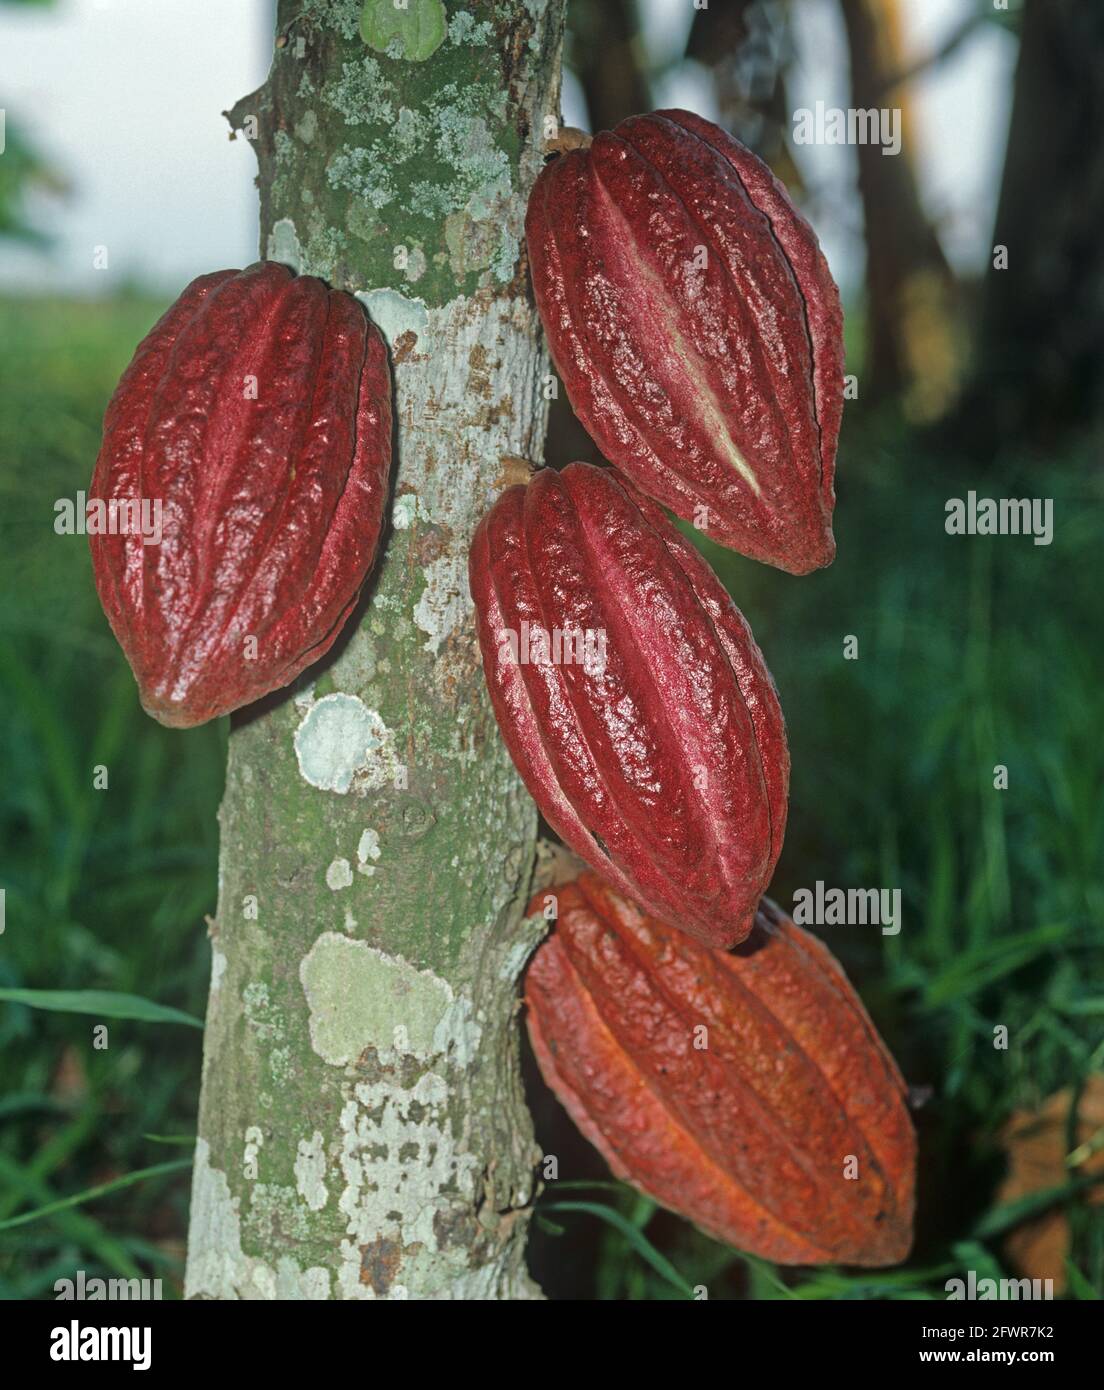 Mature cocoa pods (Theobroma cacao) on a tree in a Colombian plantation near Cali Stock Photo